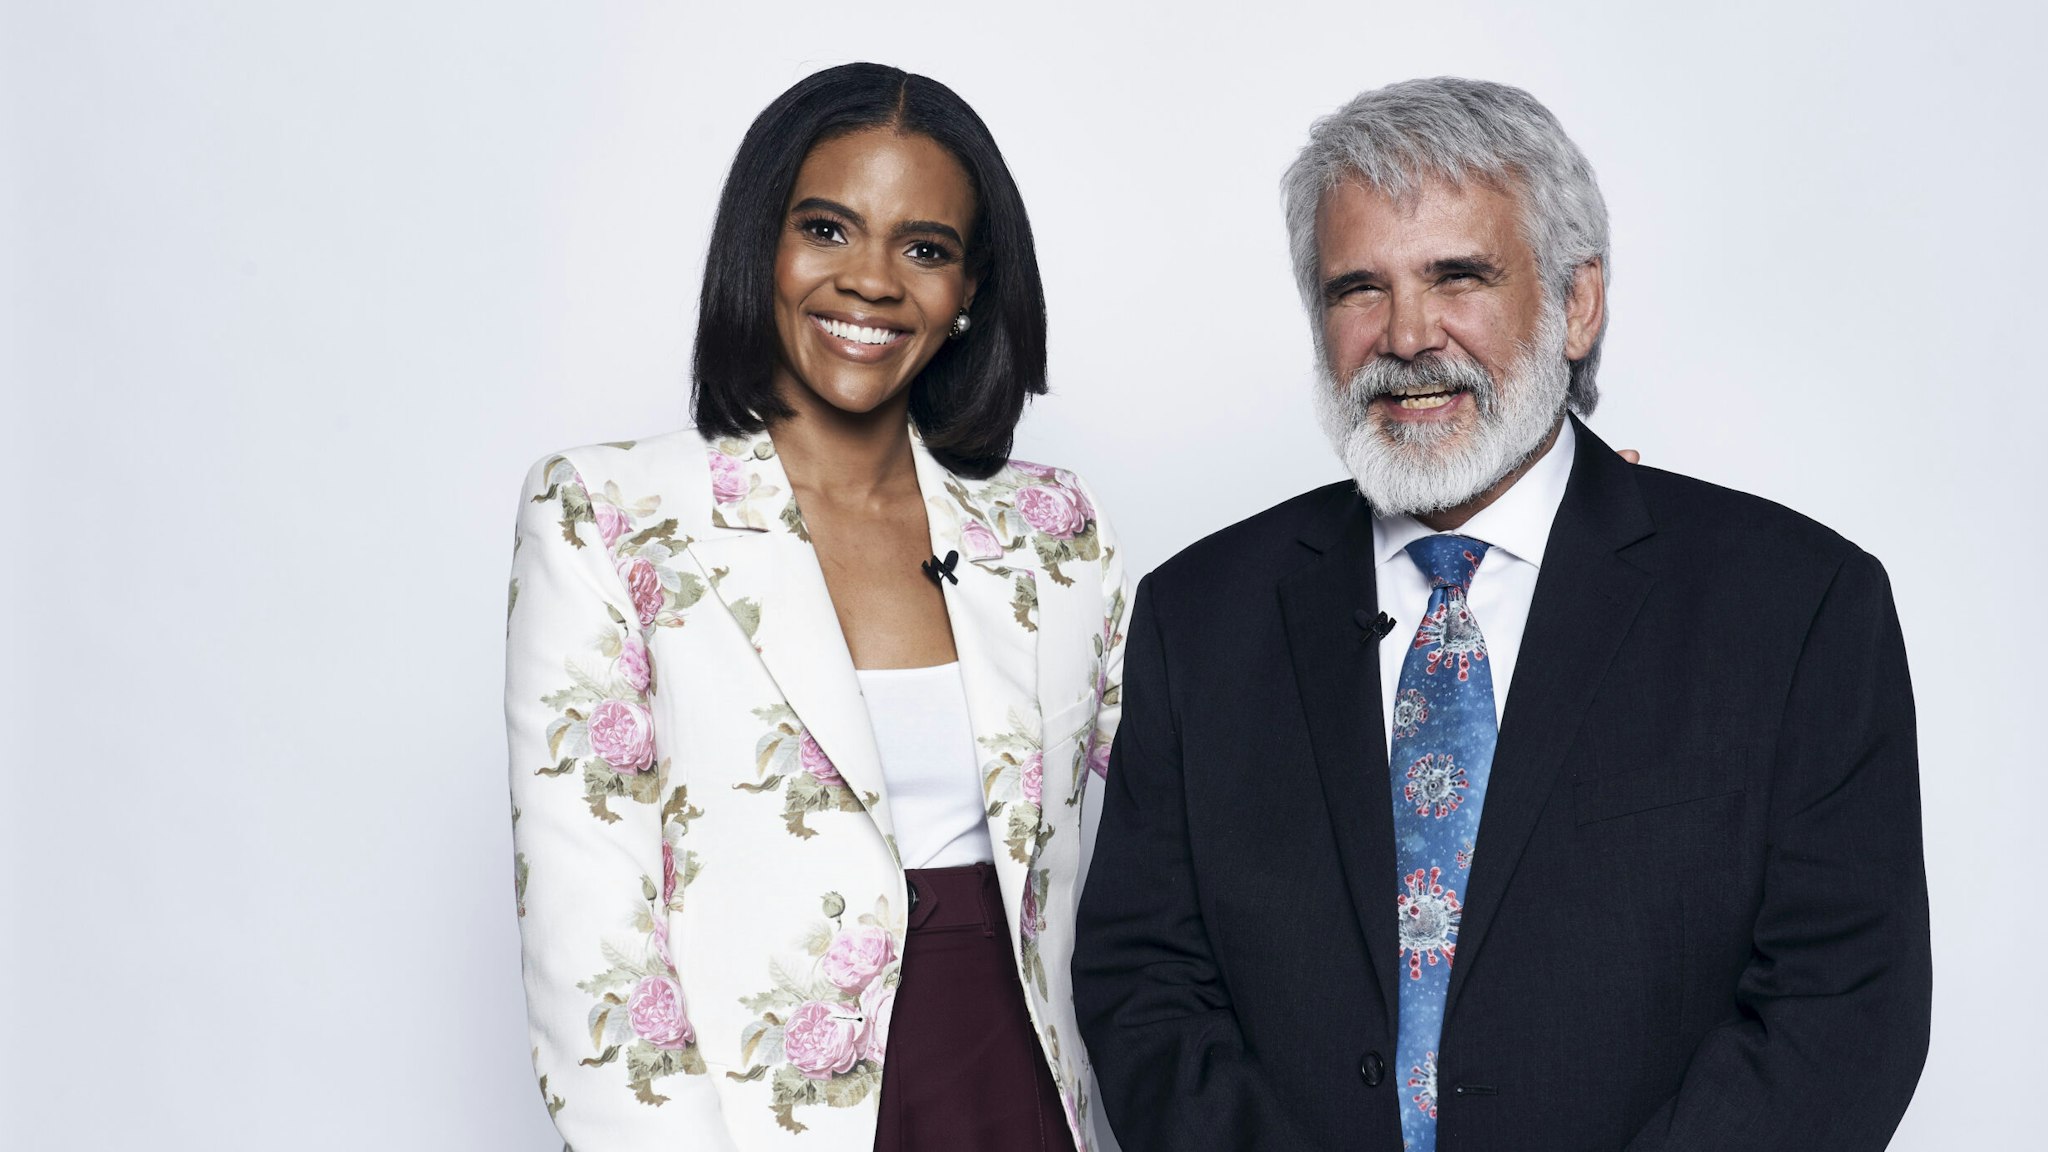 Dr. Robert Malone will be on Candace Owens' show Tuesday night